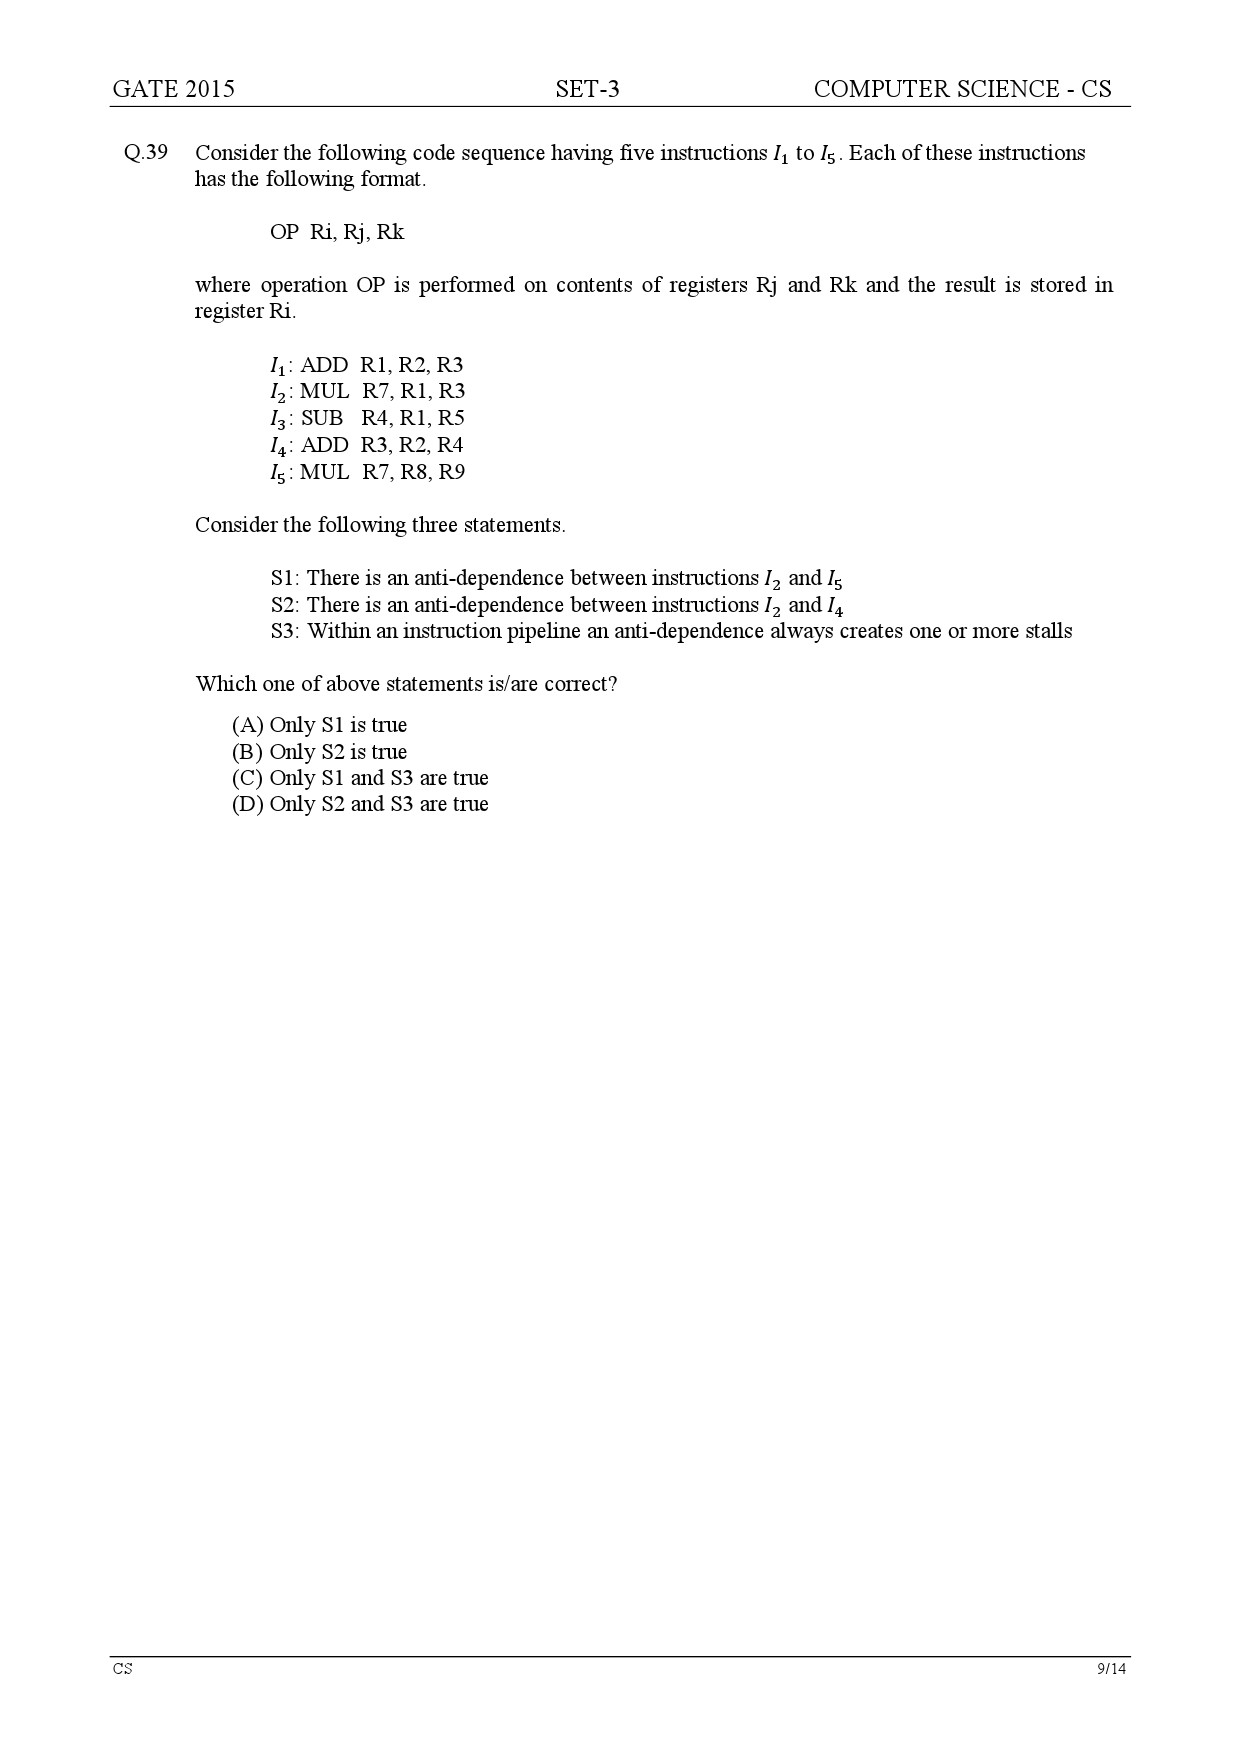 GATE Exam Question Paper 2015 Computer Science and Information Technology Set 3 9